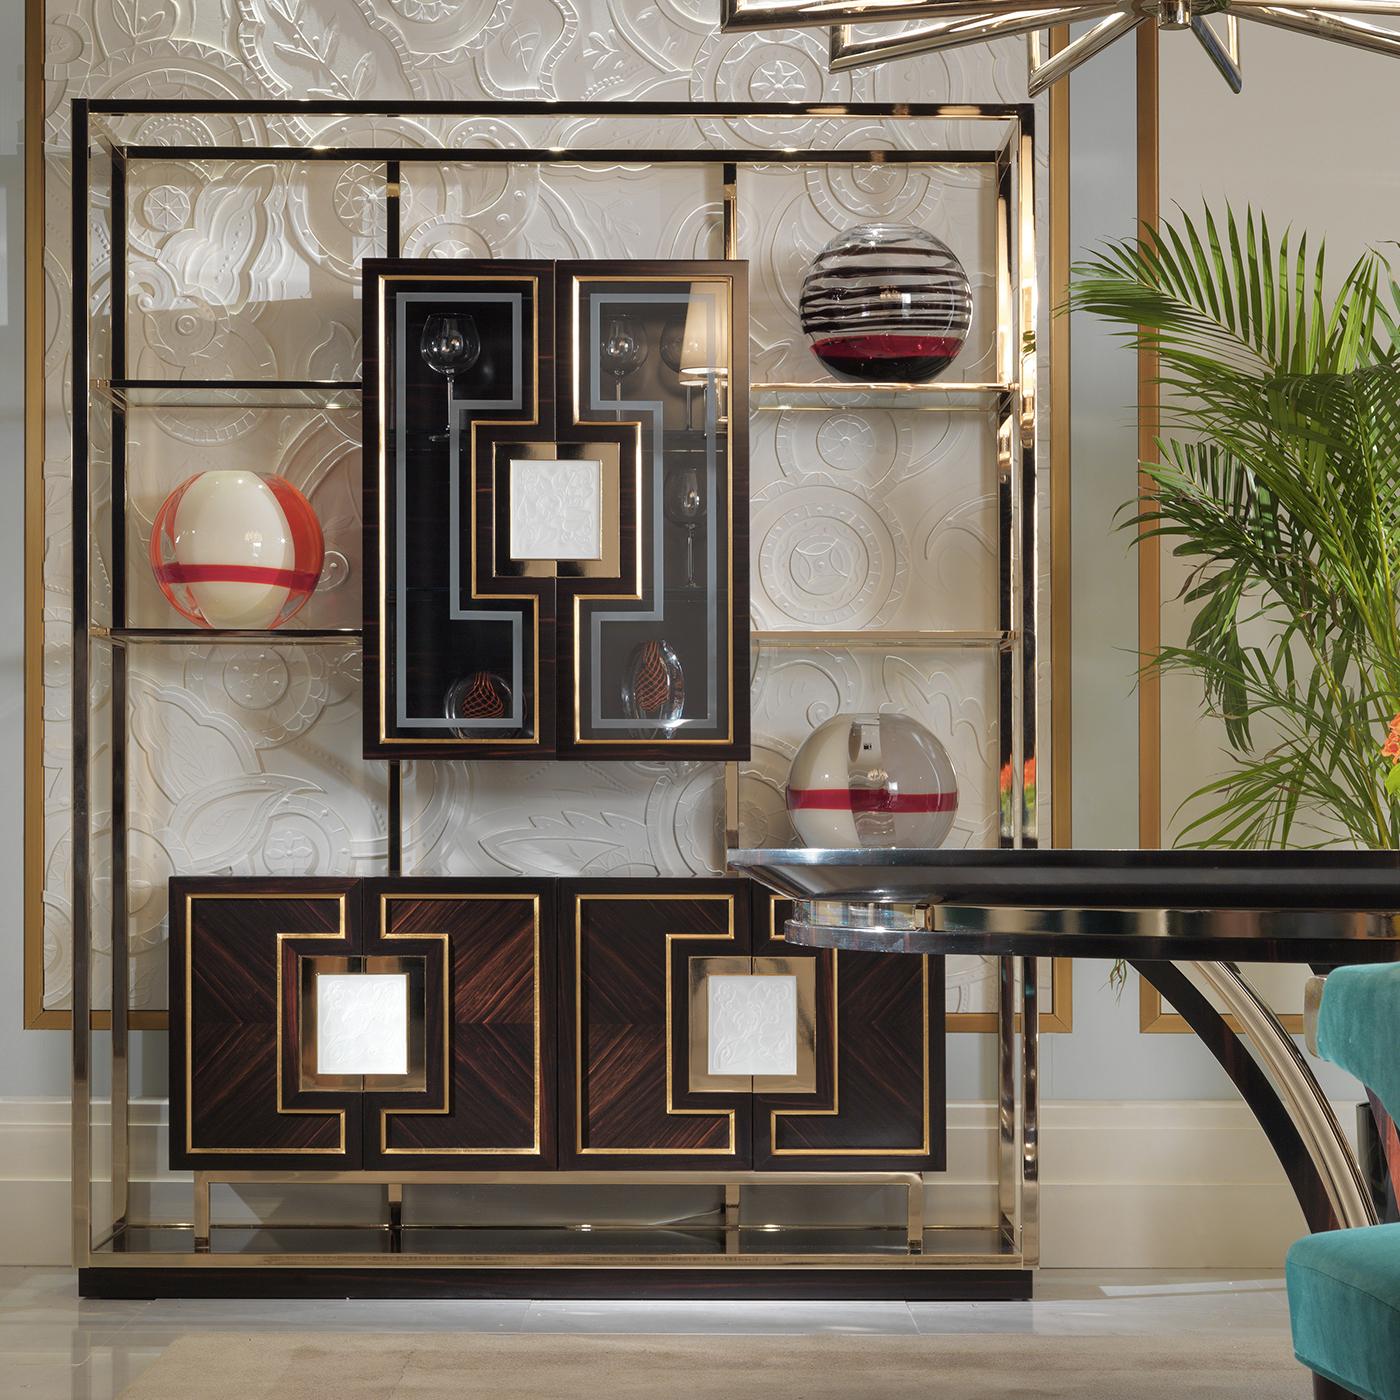 Part of a series of furniture pieces in ebony that boasts impeccable craftsmanship, noble materials, and a bold and unique design, this stunning glass cabinet will be an eye-catching addition to any living room or dining room. The unique silhouette